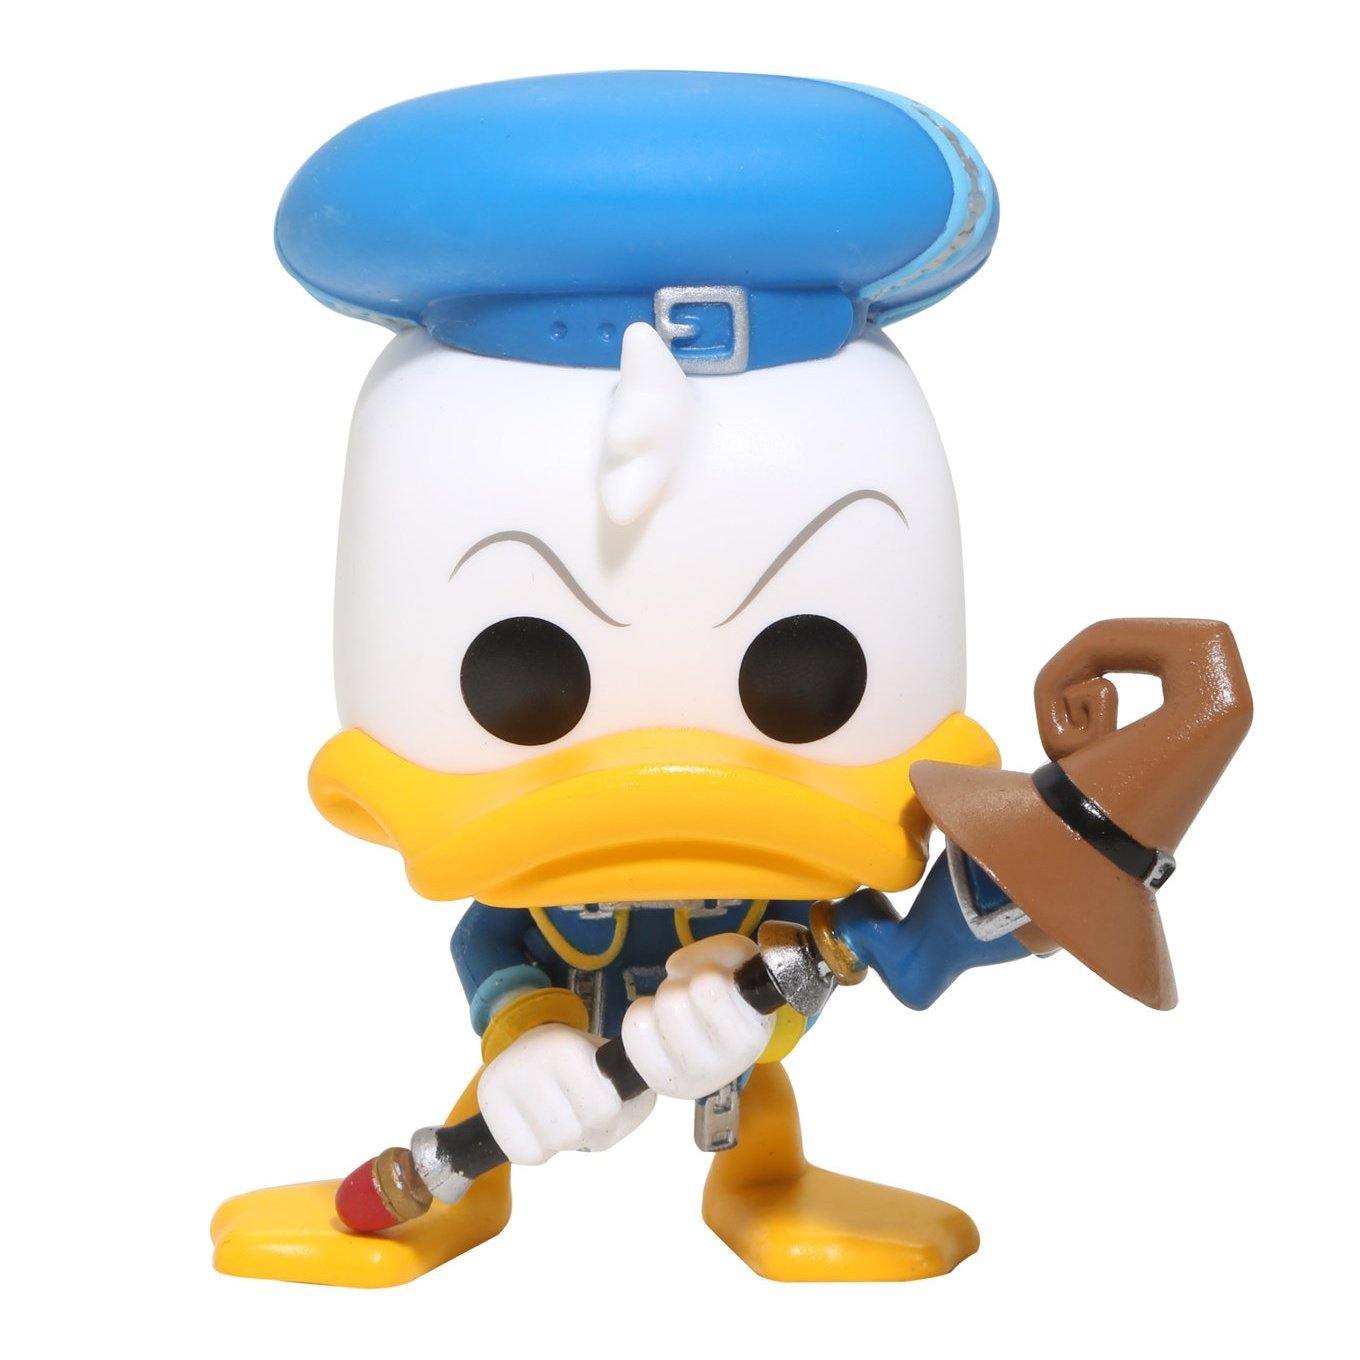 Donald Duck blasts into action in Funko Pop form image 2